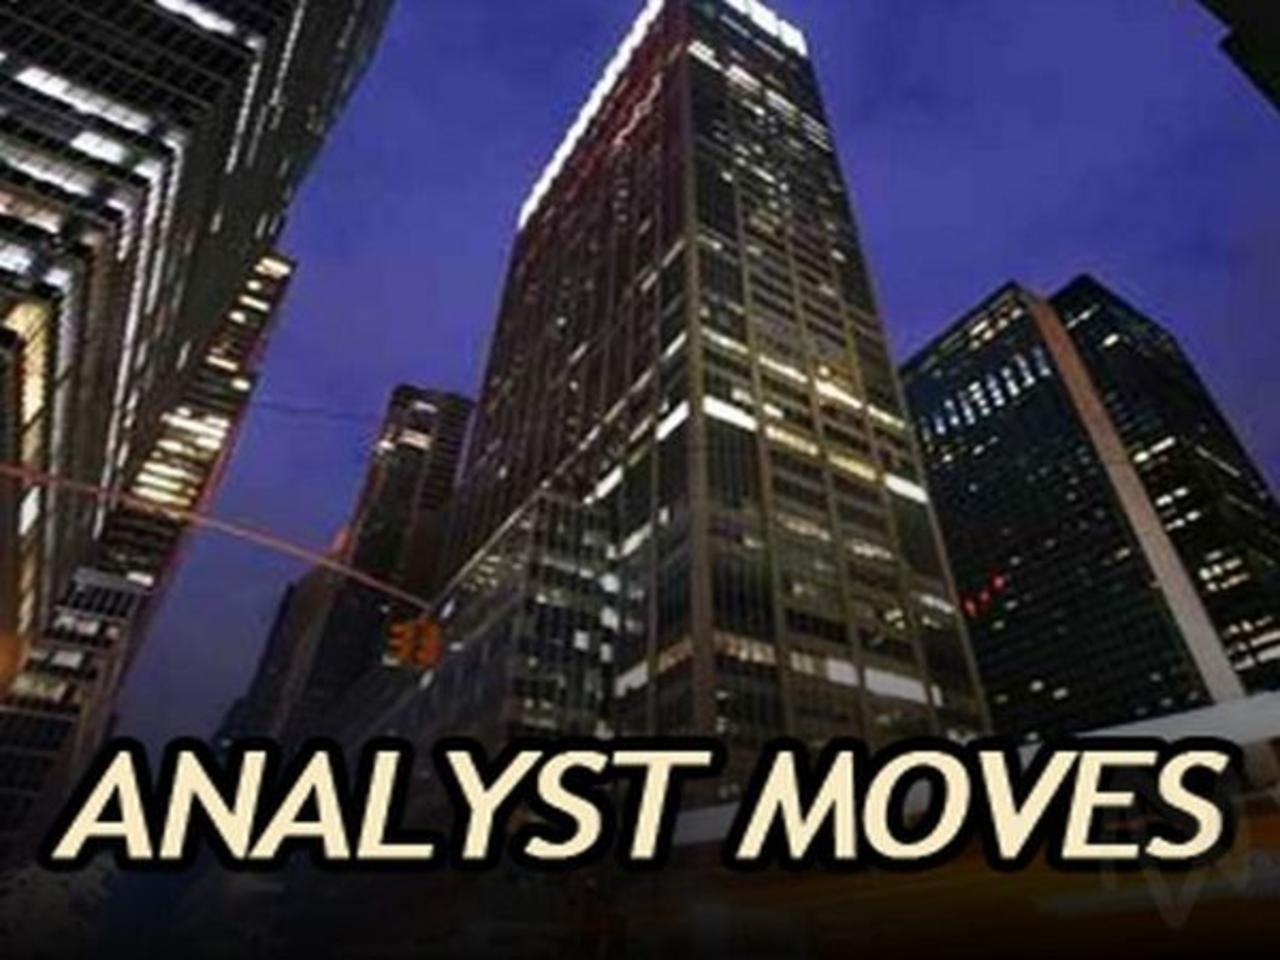 Dow Analyst Moves: V